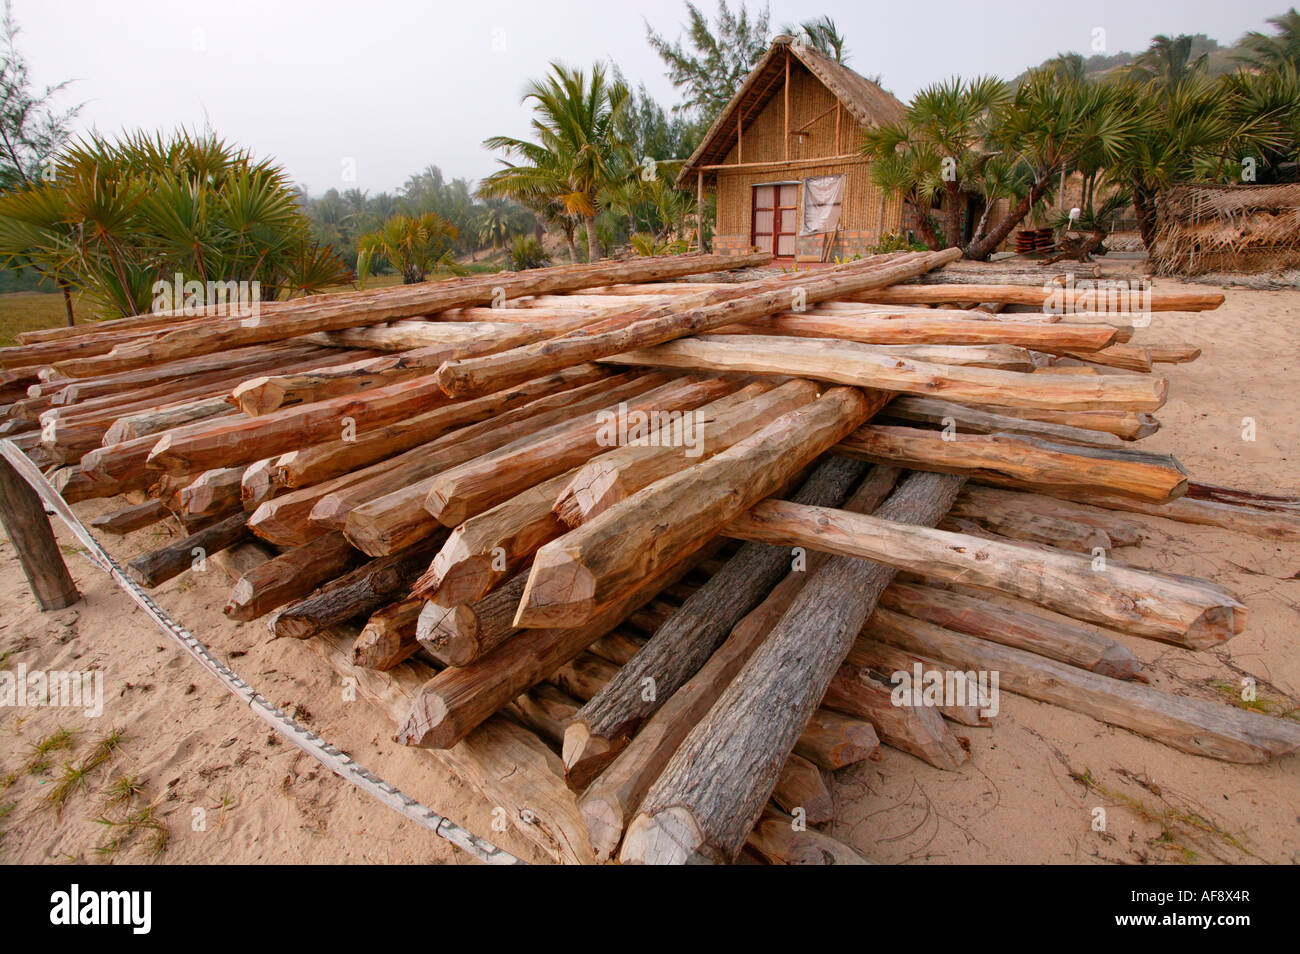 Lebombo ironwood (Androstachys johnsonii)  poles stacked and ready for use in building a new lodge Stock Photo